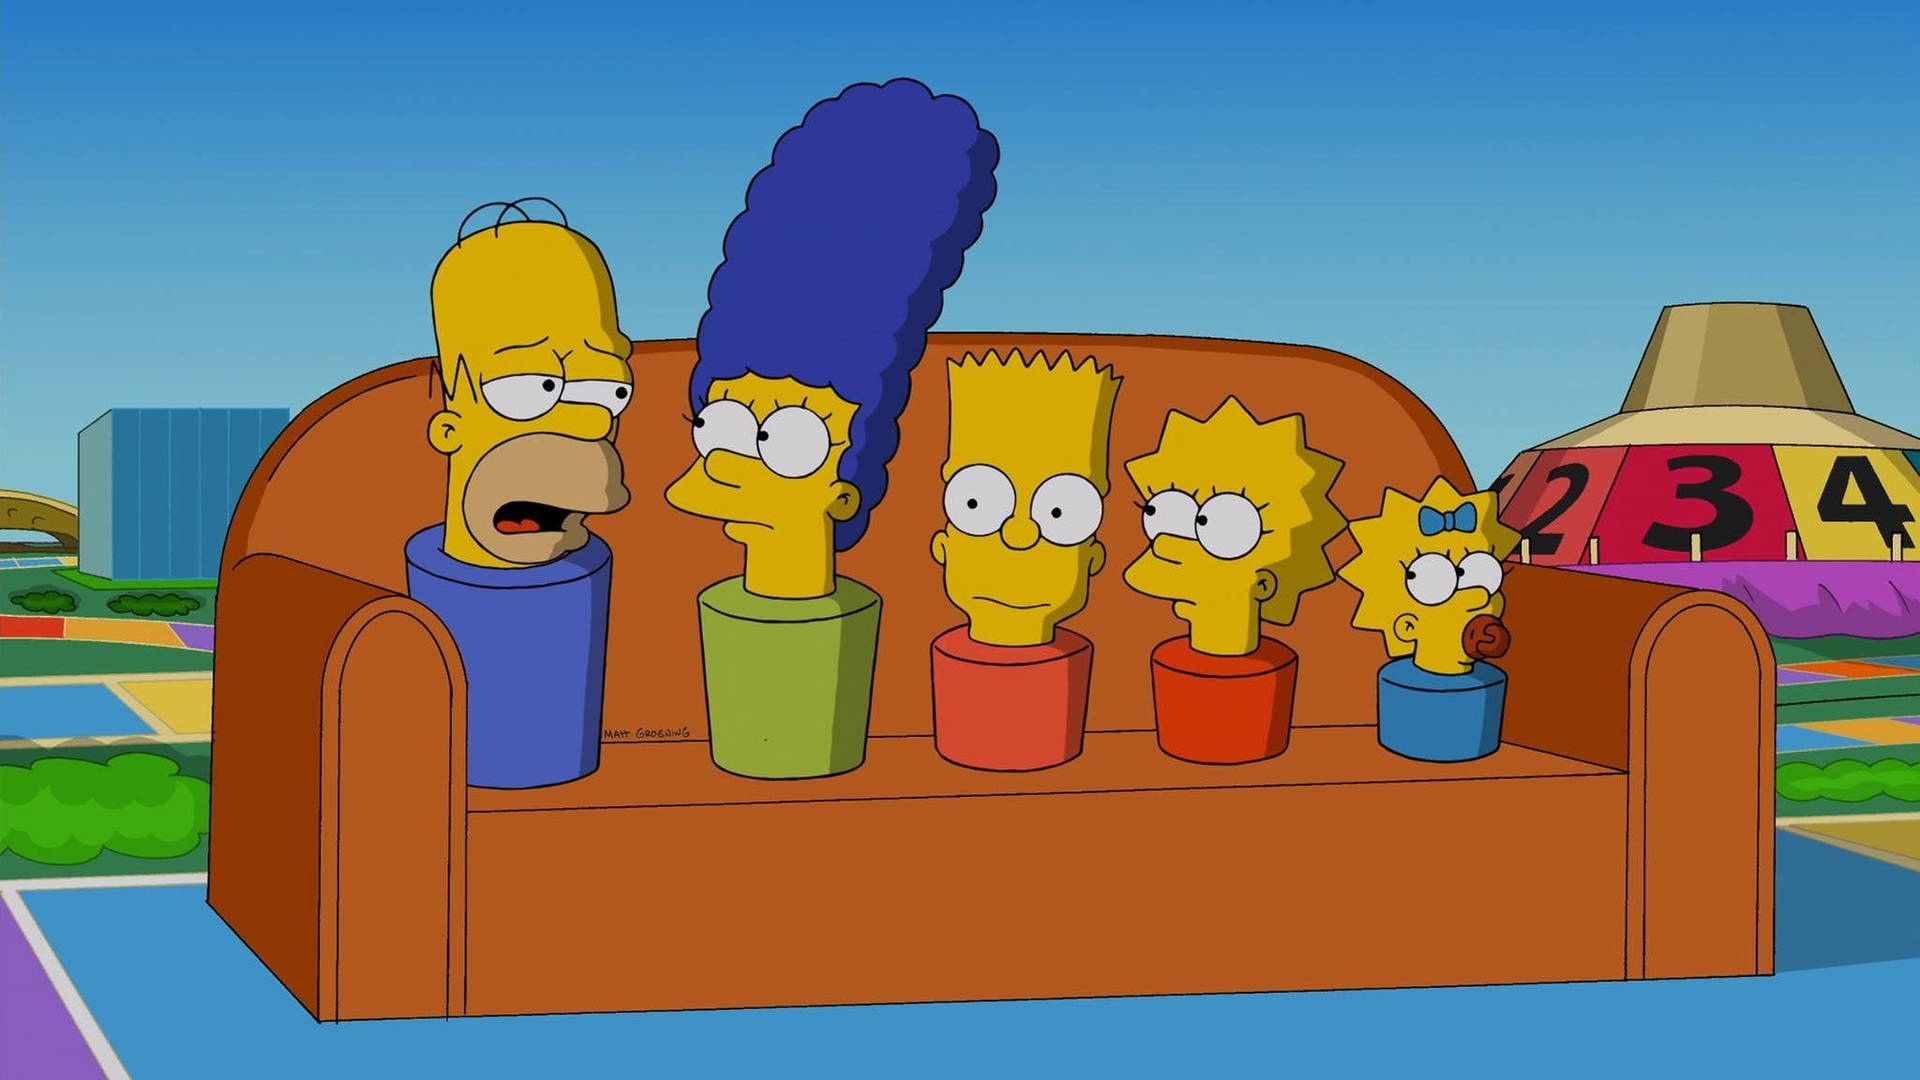 Marge Simpsons The Game Of Life Wallpaper